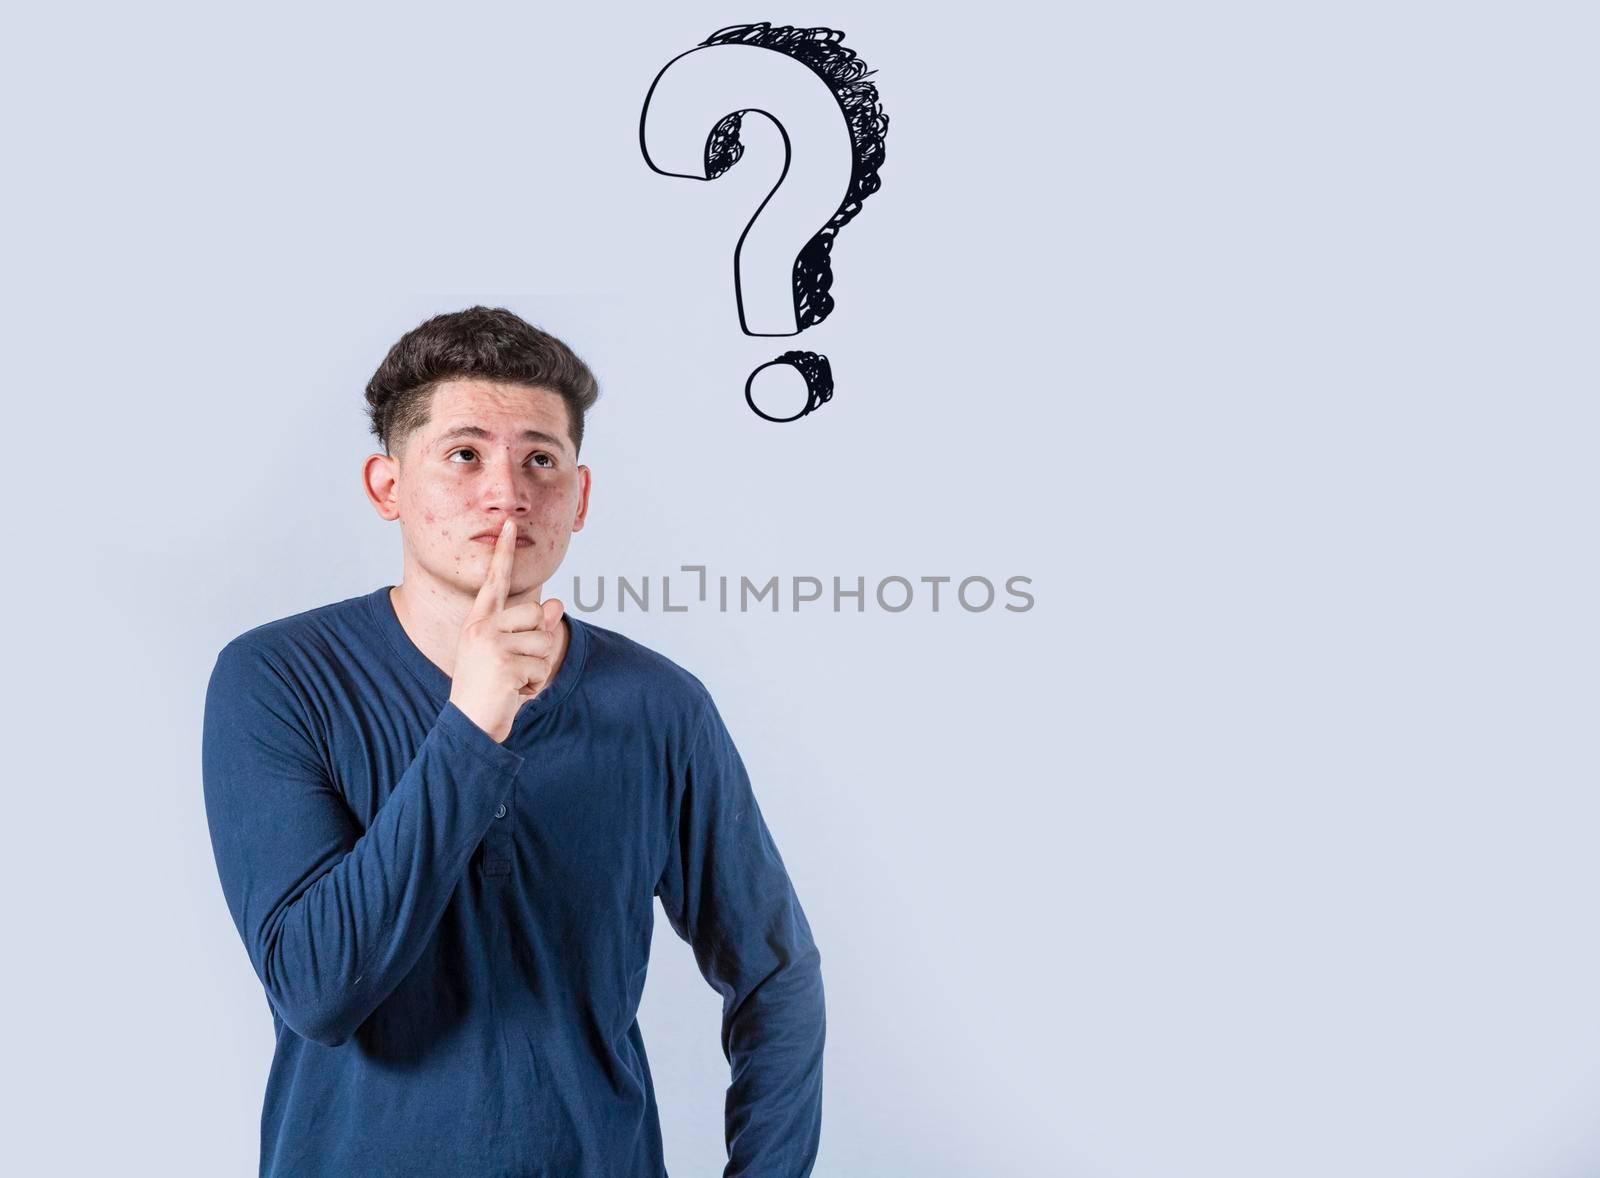 Thoughtful young man looking up with exclamation marks, Thoughtful man with exclamation marks on isolated background, Indecisive man looking up , Concept of man asking with exclamation marks
